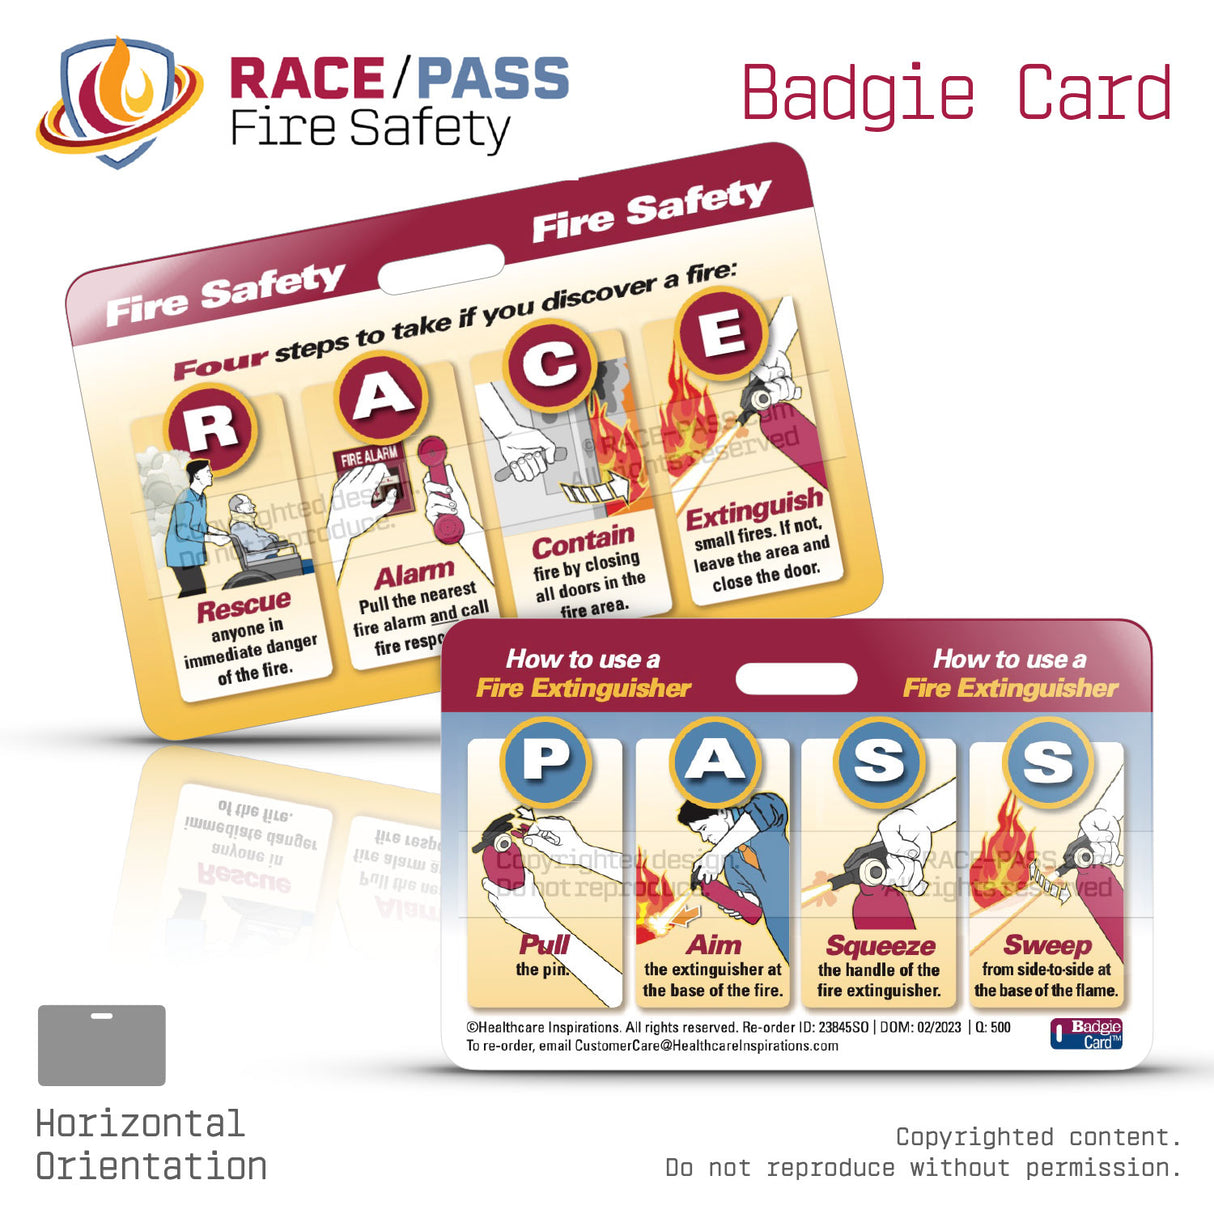 Horizontal RACE/PASS Fire Safety Badgie Card gives your staff an instant reference of what to do in case of a fire.